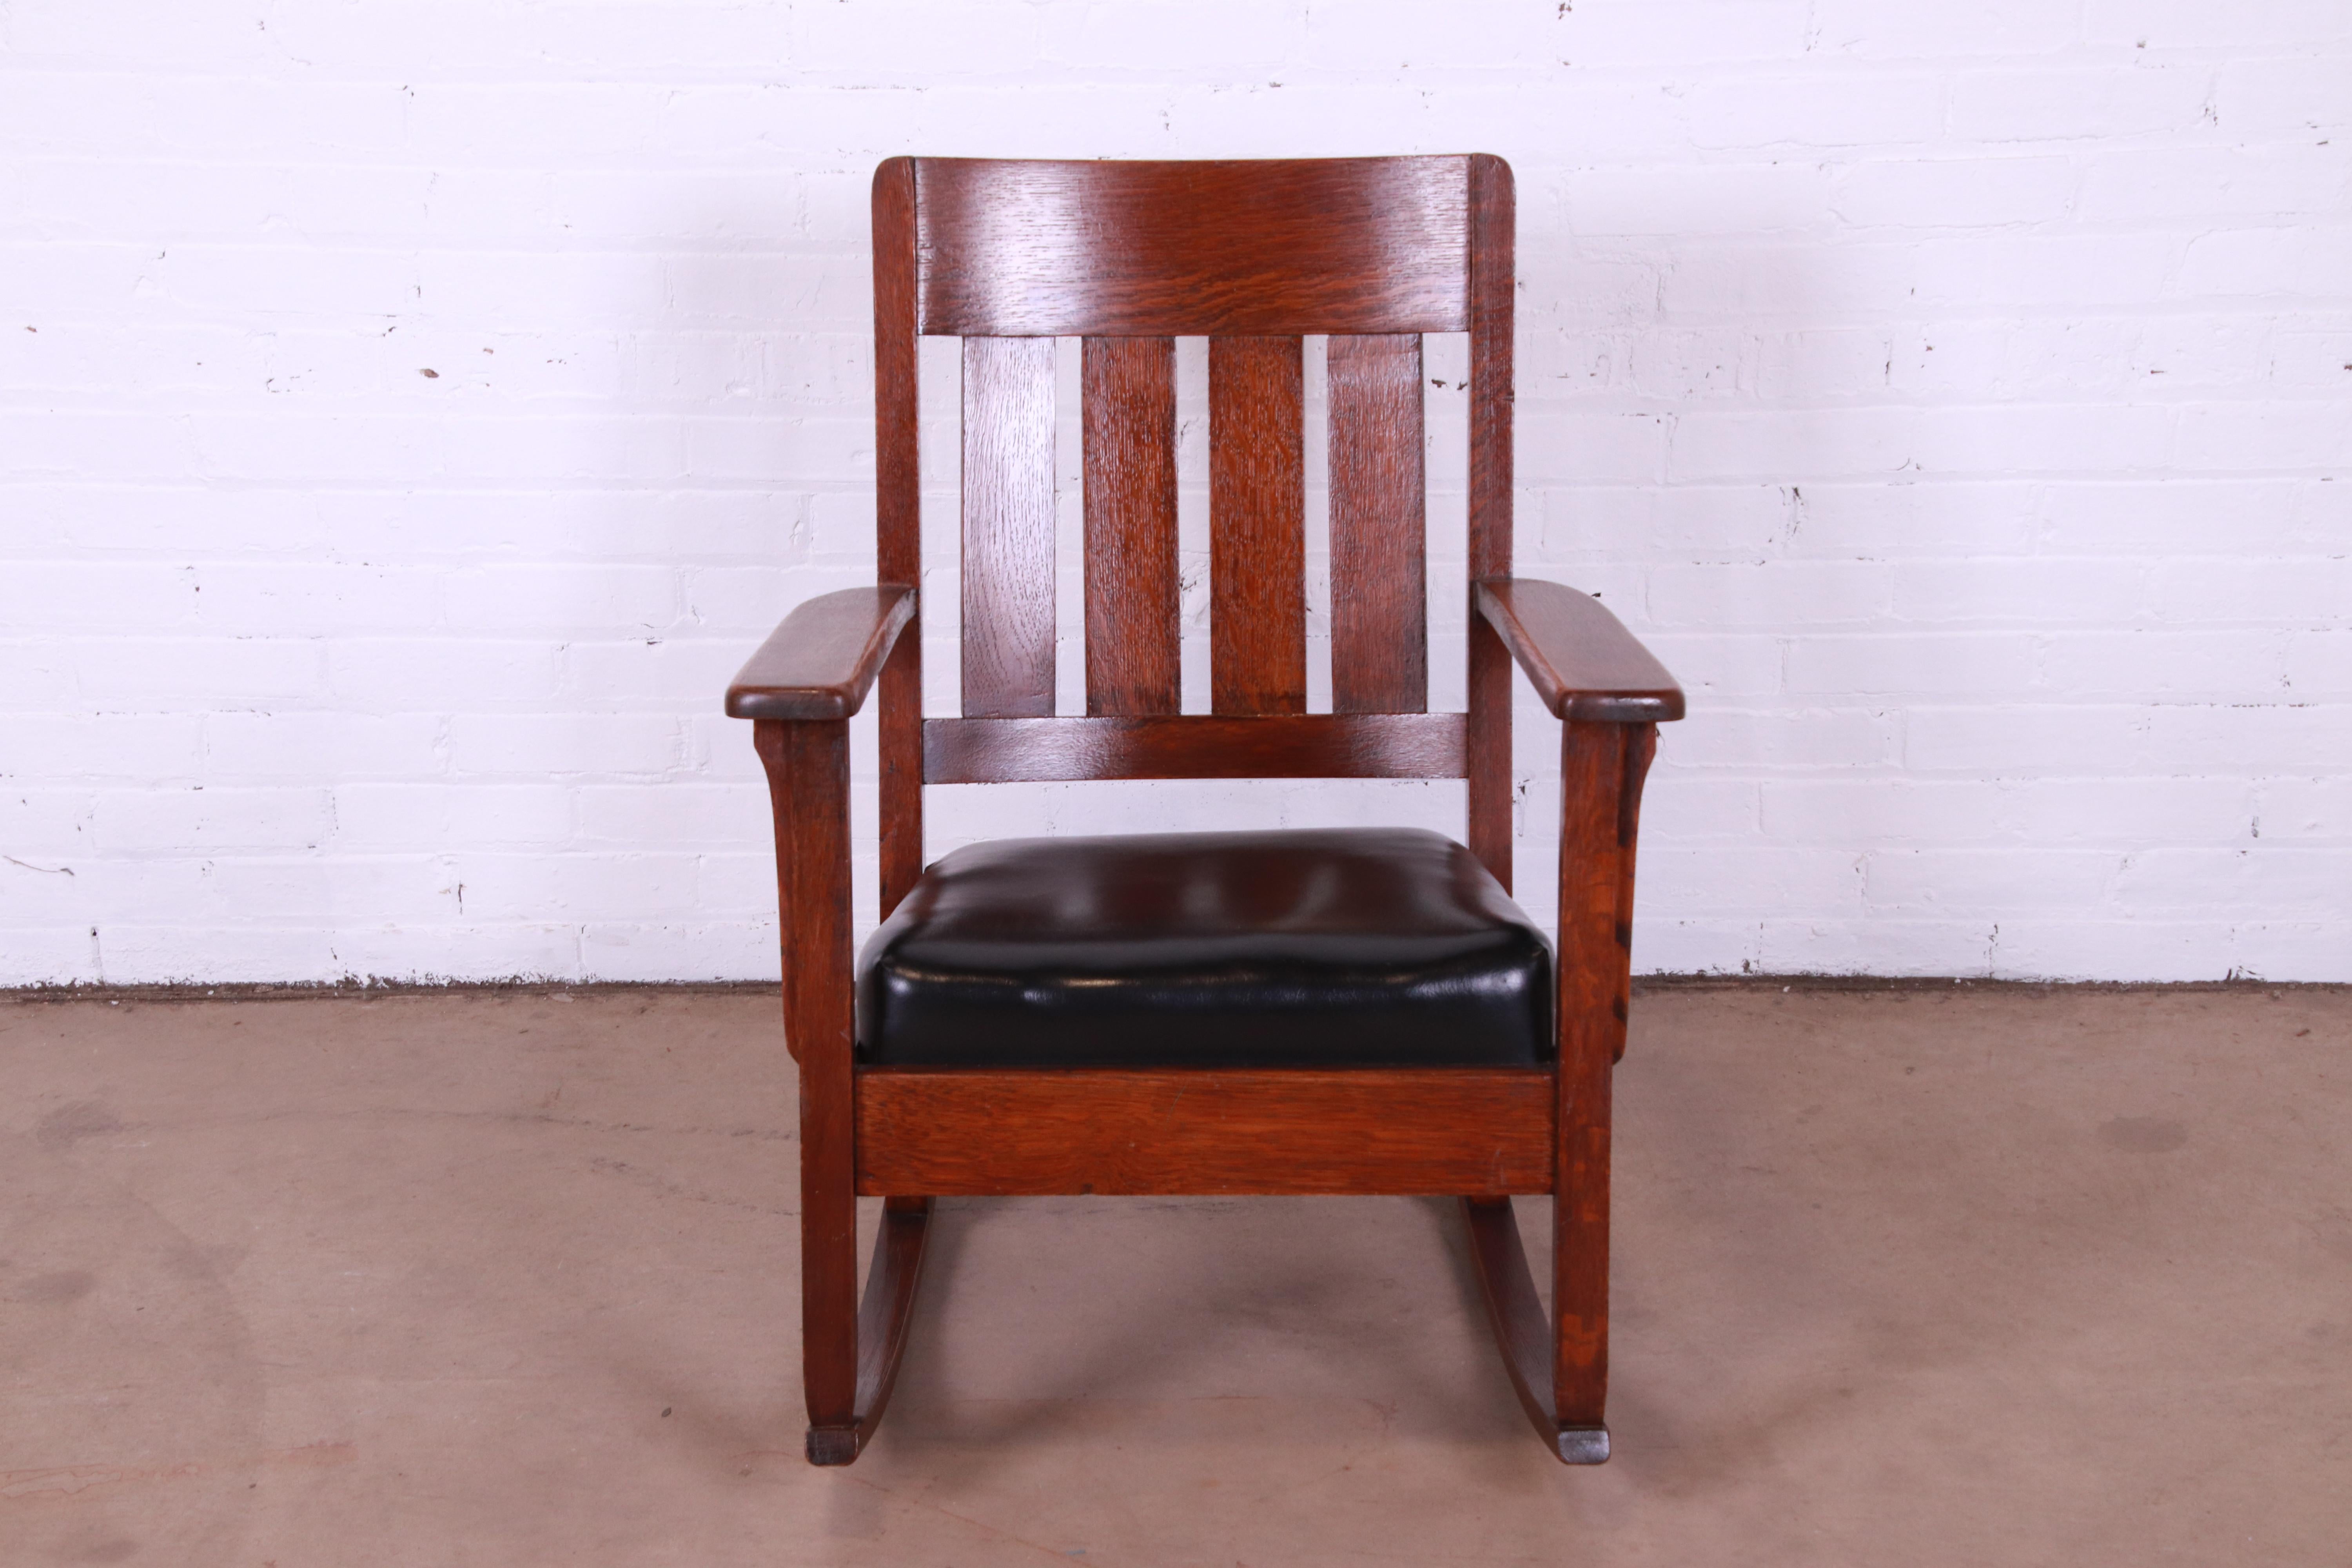 A gorgeous Mission or Arts & Crafts period rocking chair

Recently procured from Frank Lloyd Wright's DeRhodes House

In the manner of Stickley

USA, Circa 1900

Solid quarter sawn oak, with black leather upholstery.

Measures: 25.5